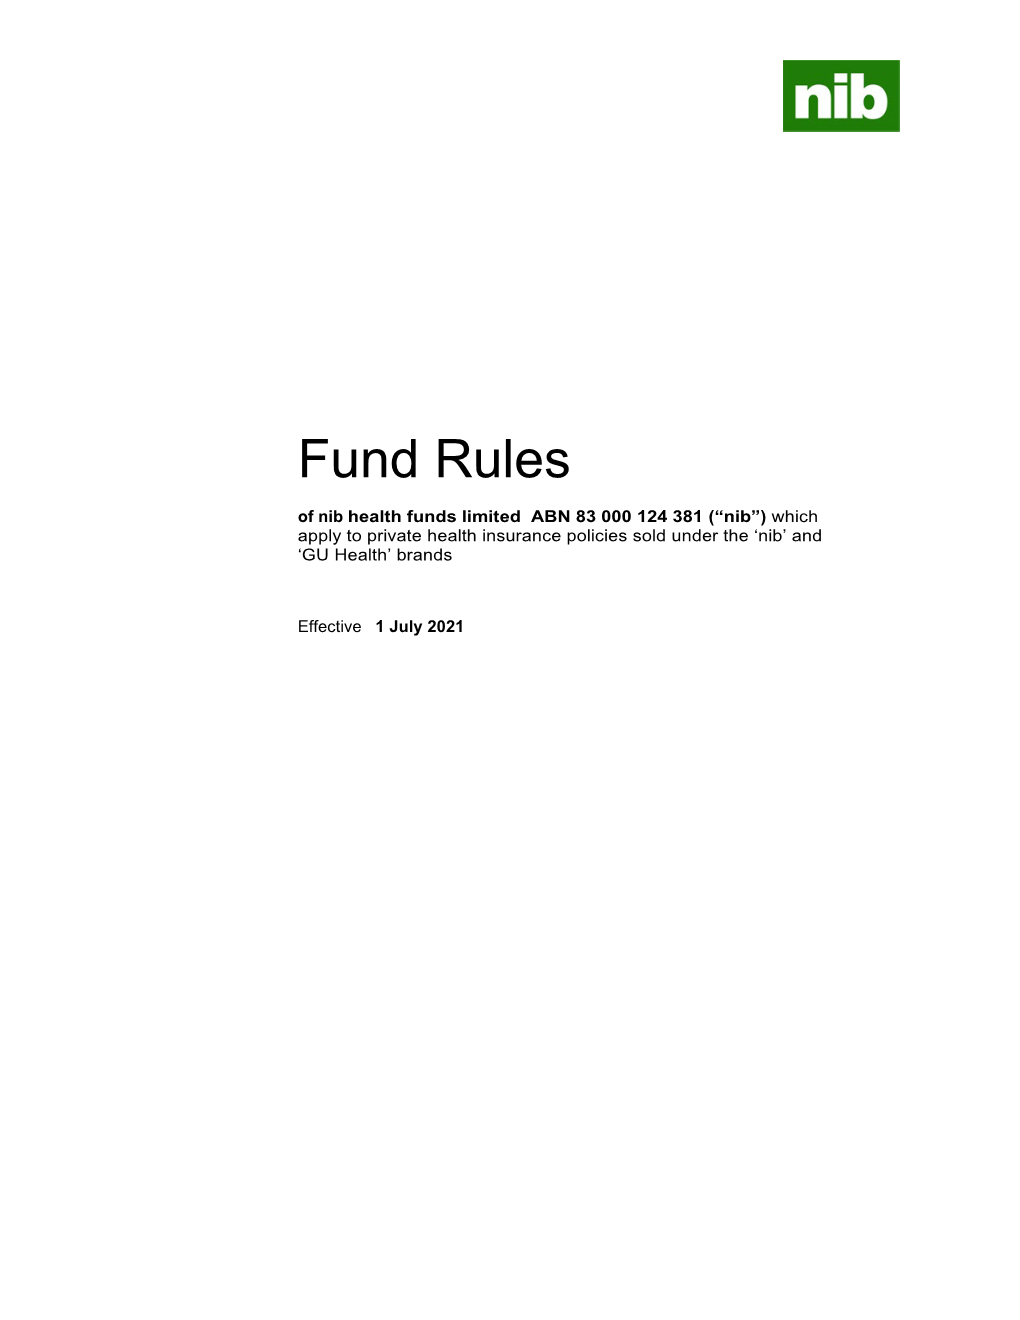 Fund Rules of Nib Health Funds Limited ABN 83 000 124 381 (“Nib”) Which Apply to Private Health Insurance Policies Sold Under the ‘Nib’ and ‘GU Health’ Brands